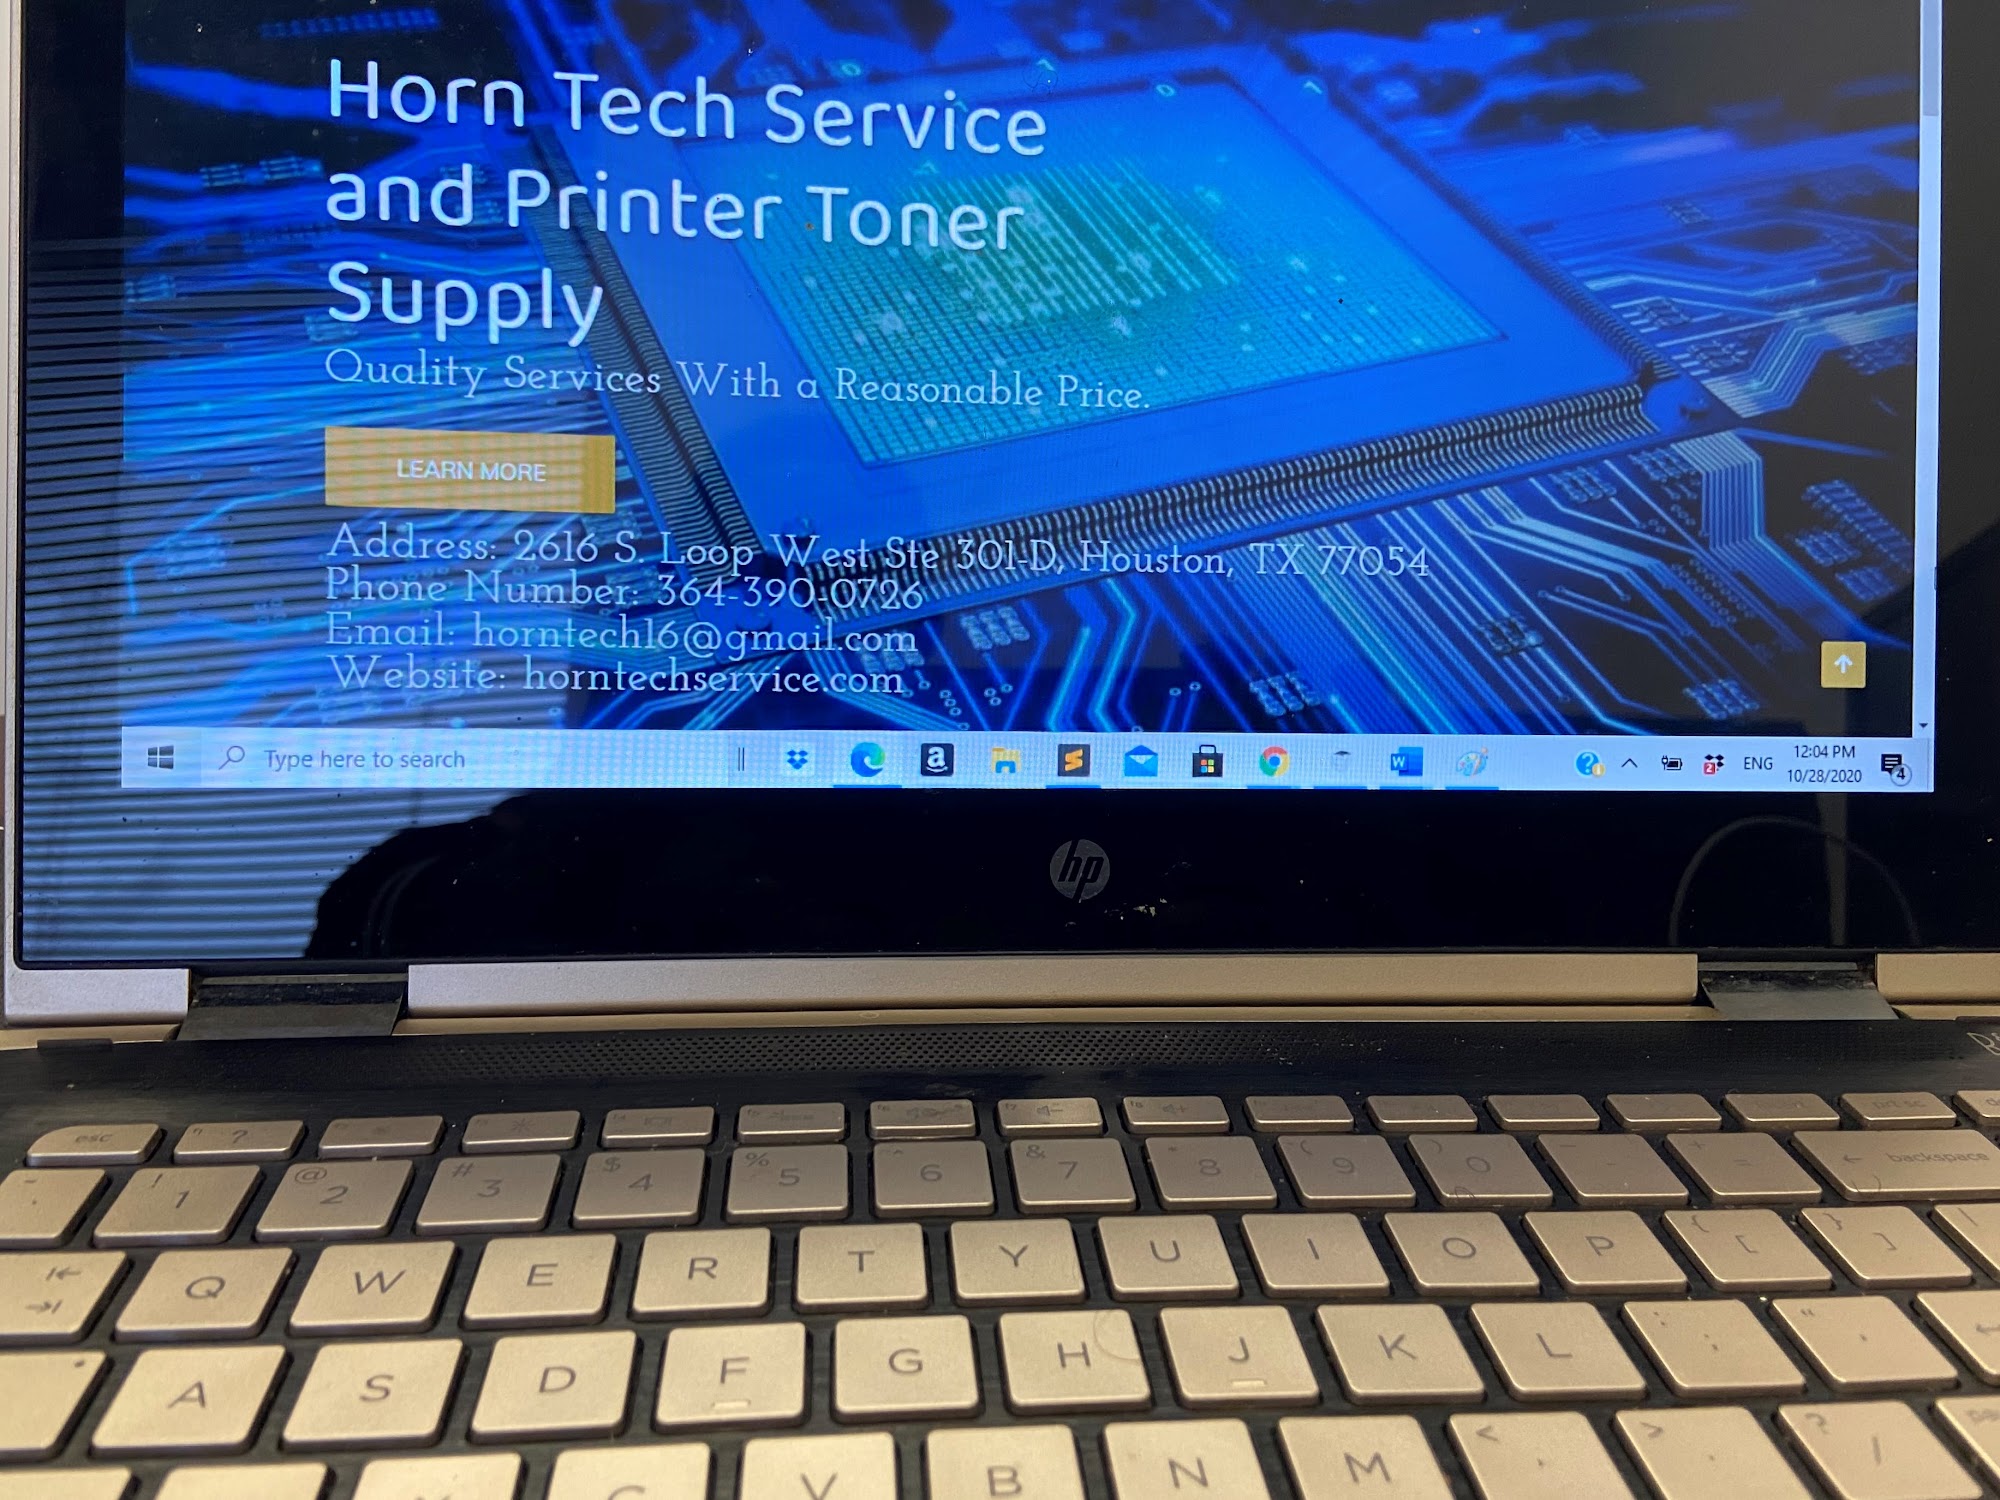 Horn Tech Service and Printer Toner Supply